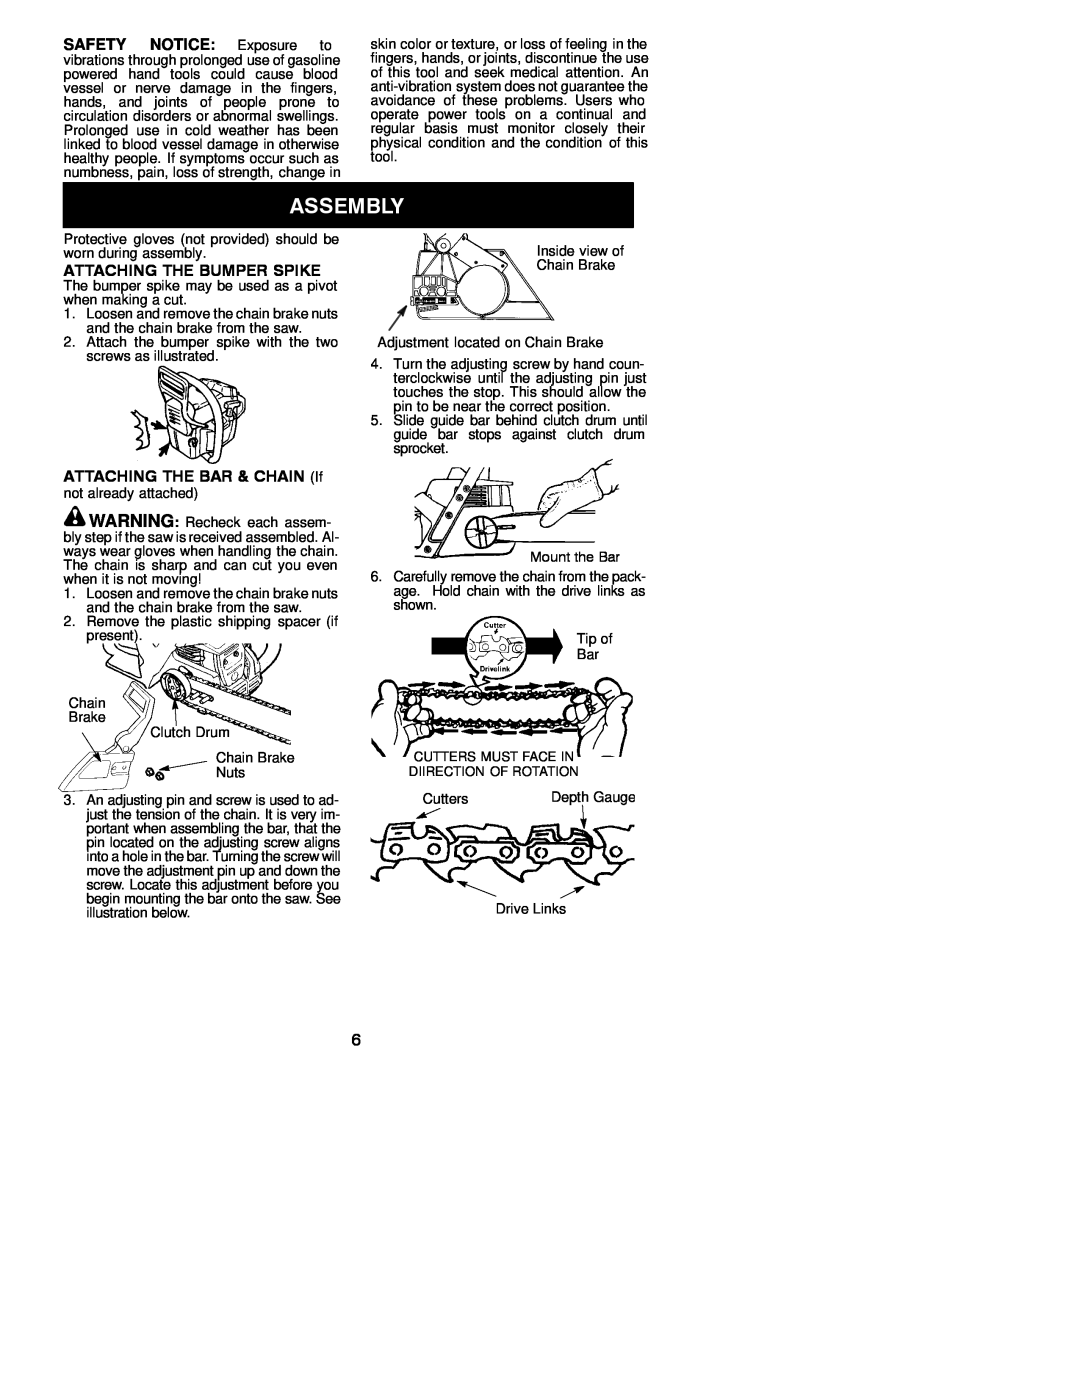 Jonsered CS 2137 instruction manual SAFETY NOTICE Exposure to, Attaching The Bumper Spike, ATTACHING THE BAR & CHAIN If 